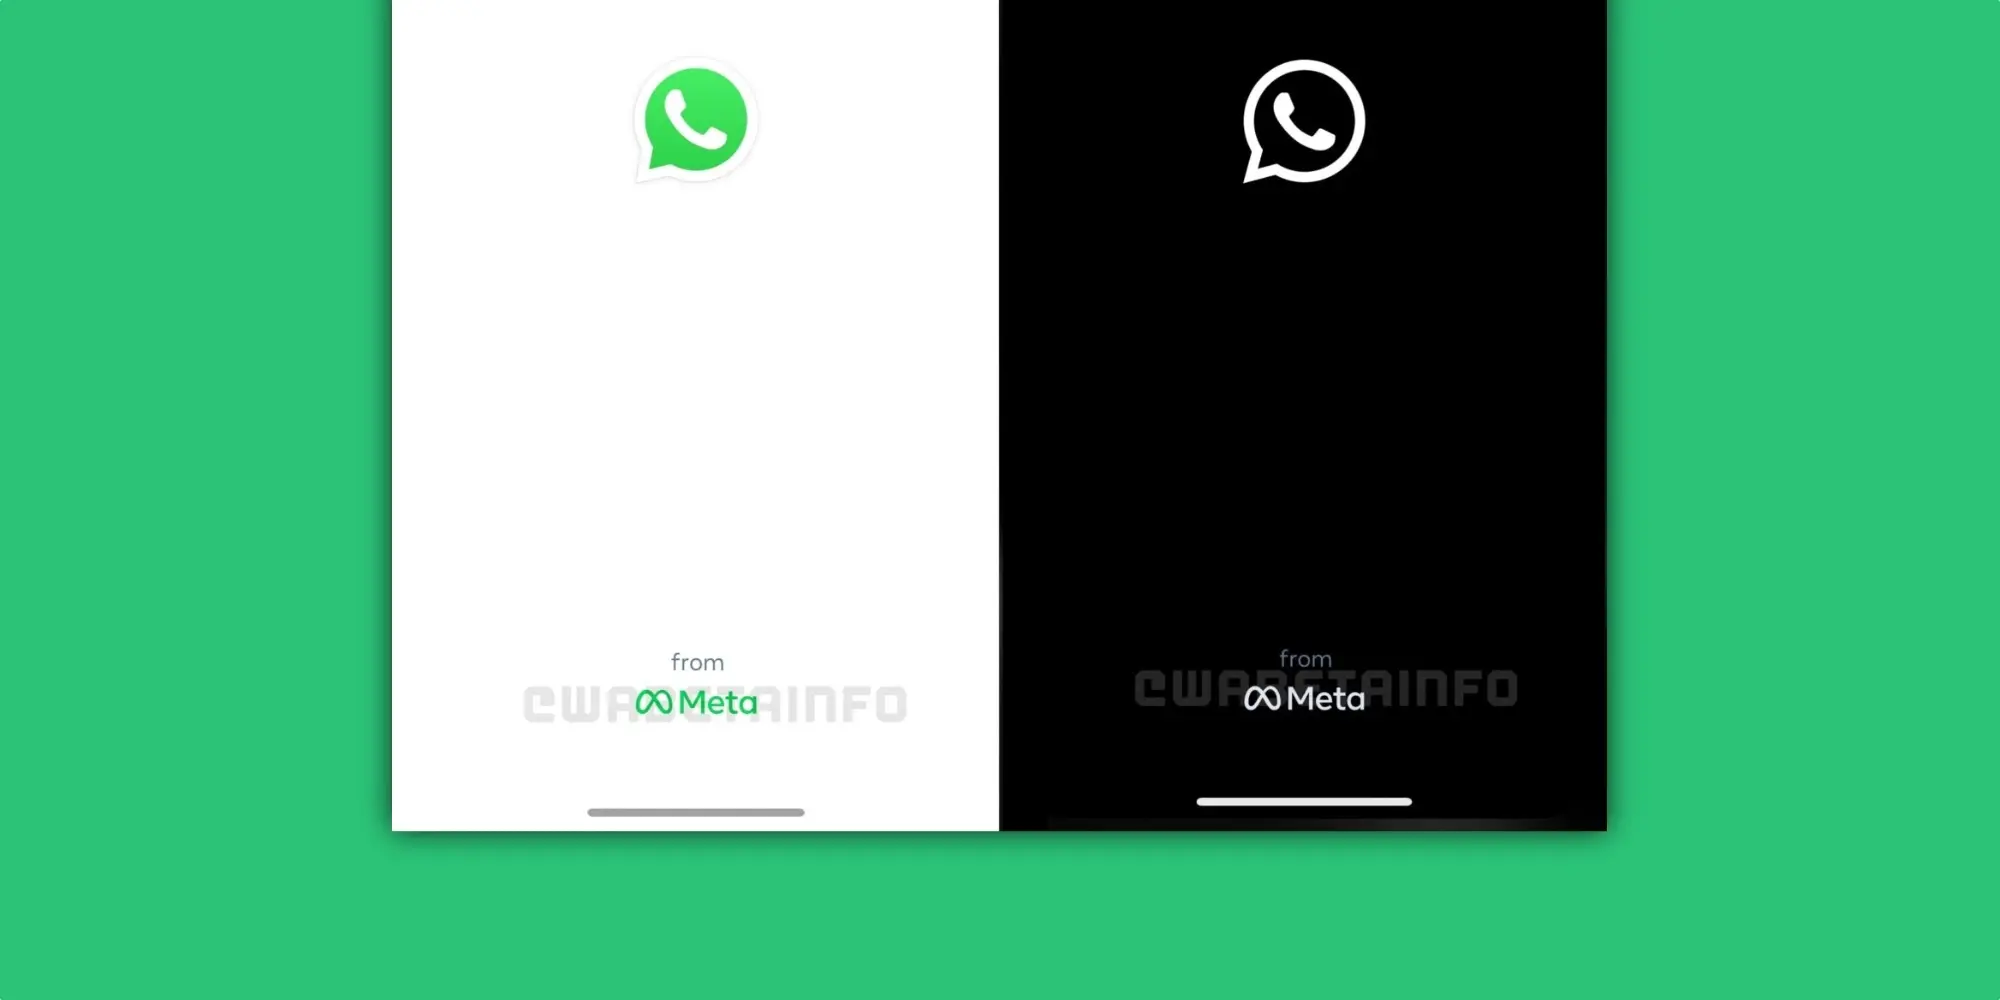 WhatsApp for iOS beta users get improved picture-in-picture interface